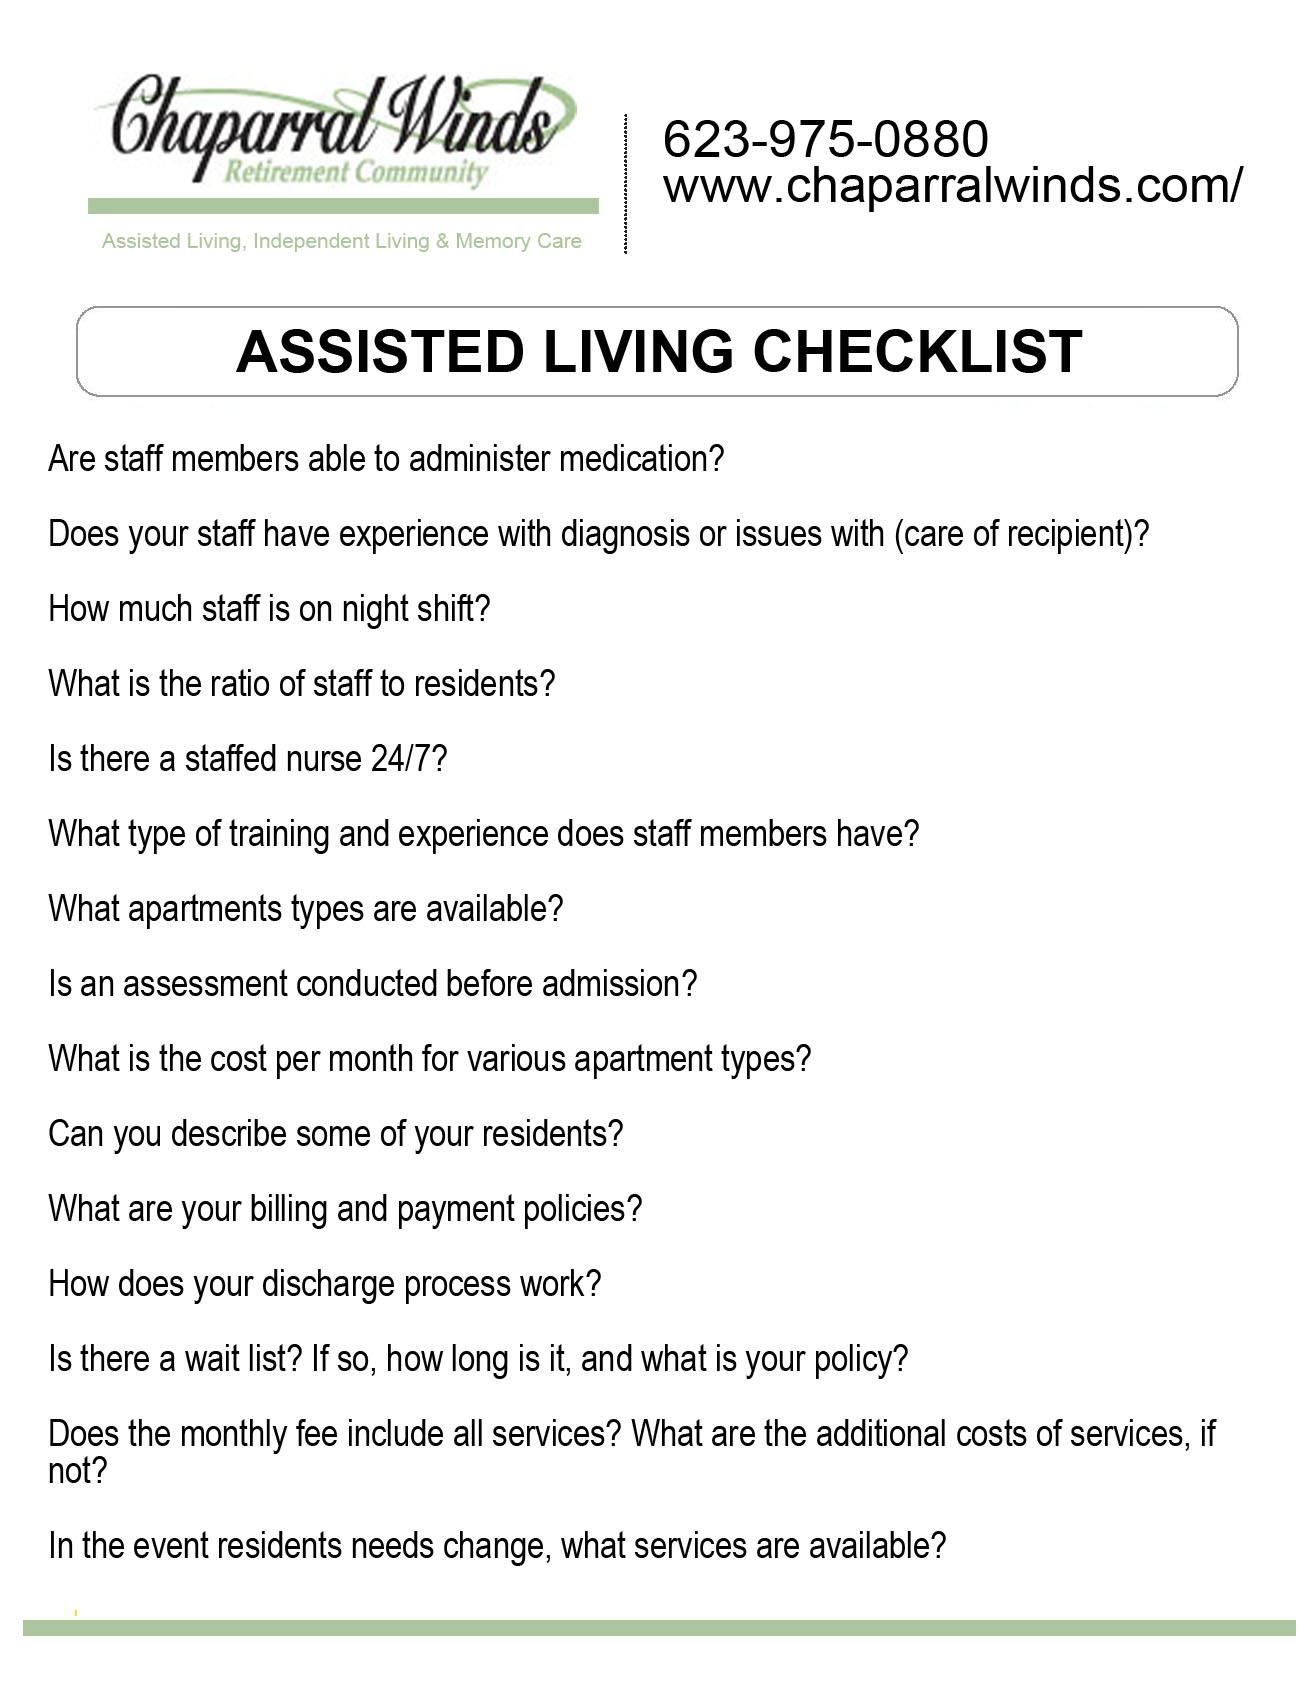 Assisted Living Checklist Chaparral Winds Retirement Community